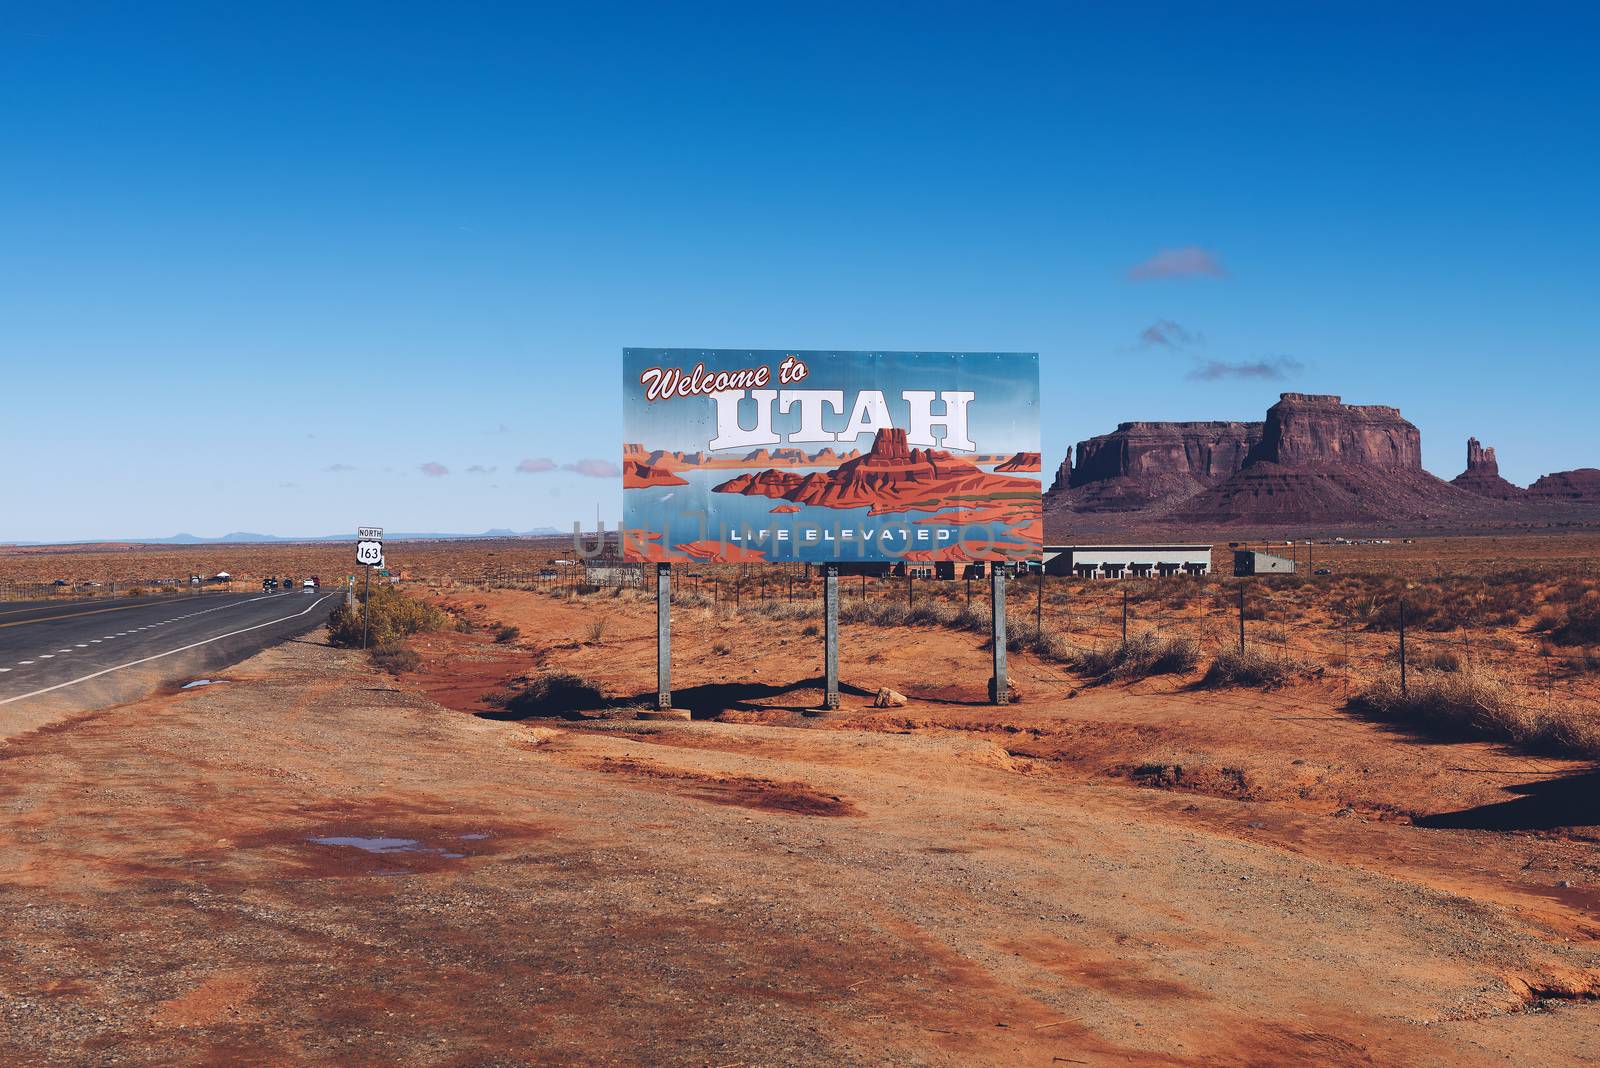 Oljato - Monument Valley, Utah, USA - October 19, 2018 : Welcome to Utah State Sign situated along US-163 at the border with Arizona near Monument Valley.